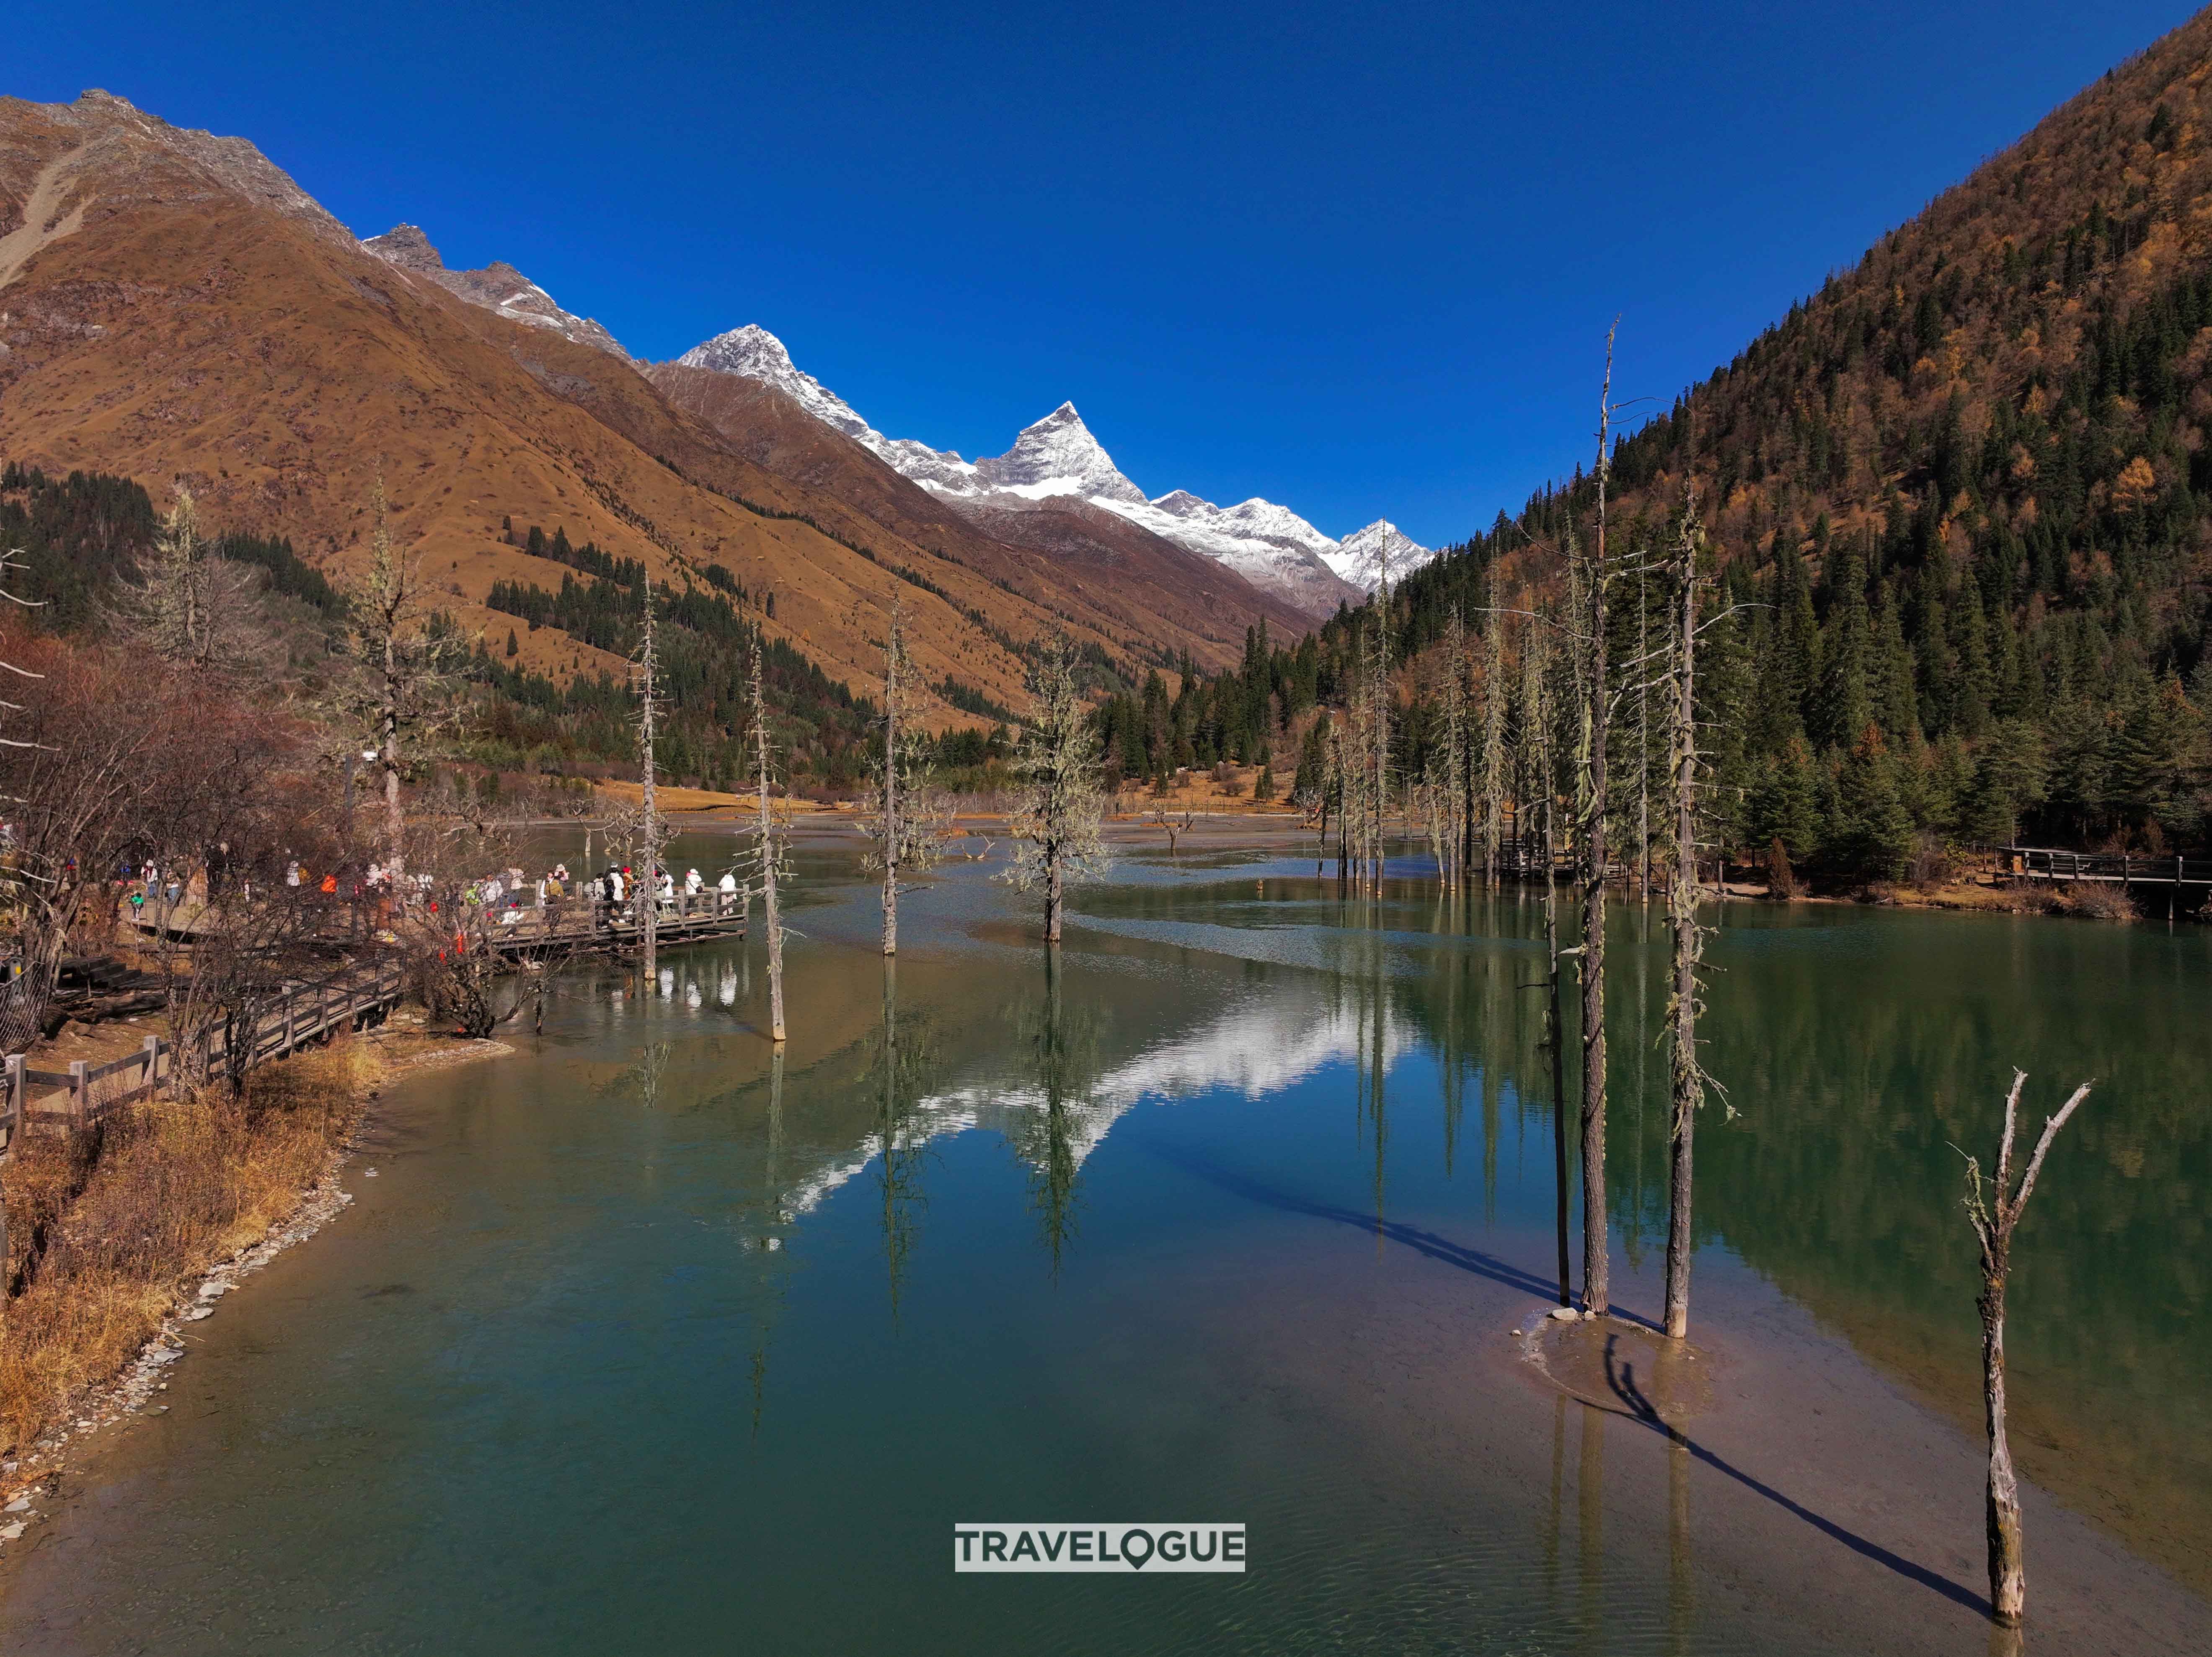 Sigulacuo is an alpine lake located in the Shuangqiao Valley of Mount Siguniang in Sichuan Province. /CGTN